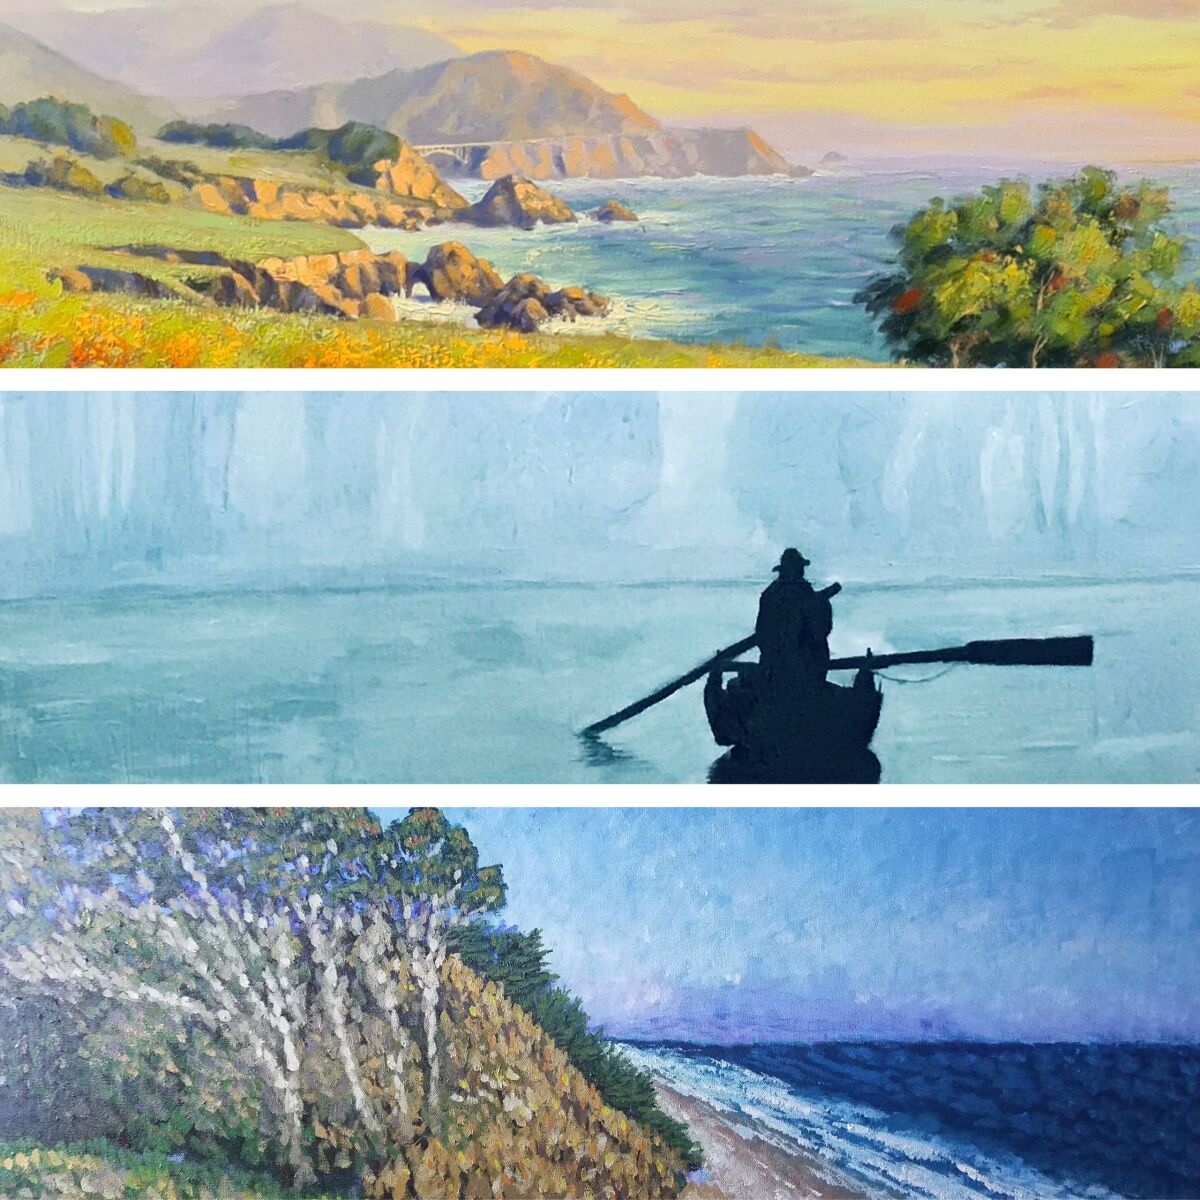 Works by Jose Luis Nunez, Dan Kilgore and Chris Conroe (top to bottom) are on view at the La Jolla Community Center.